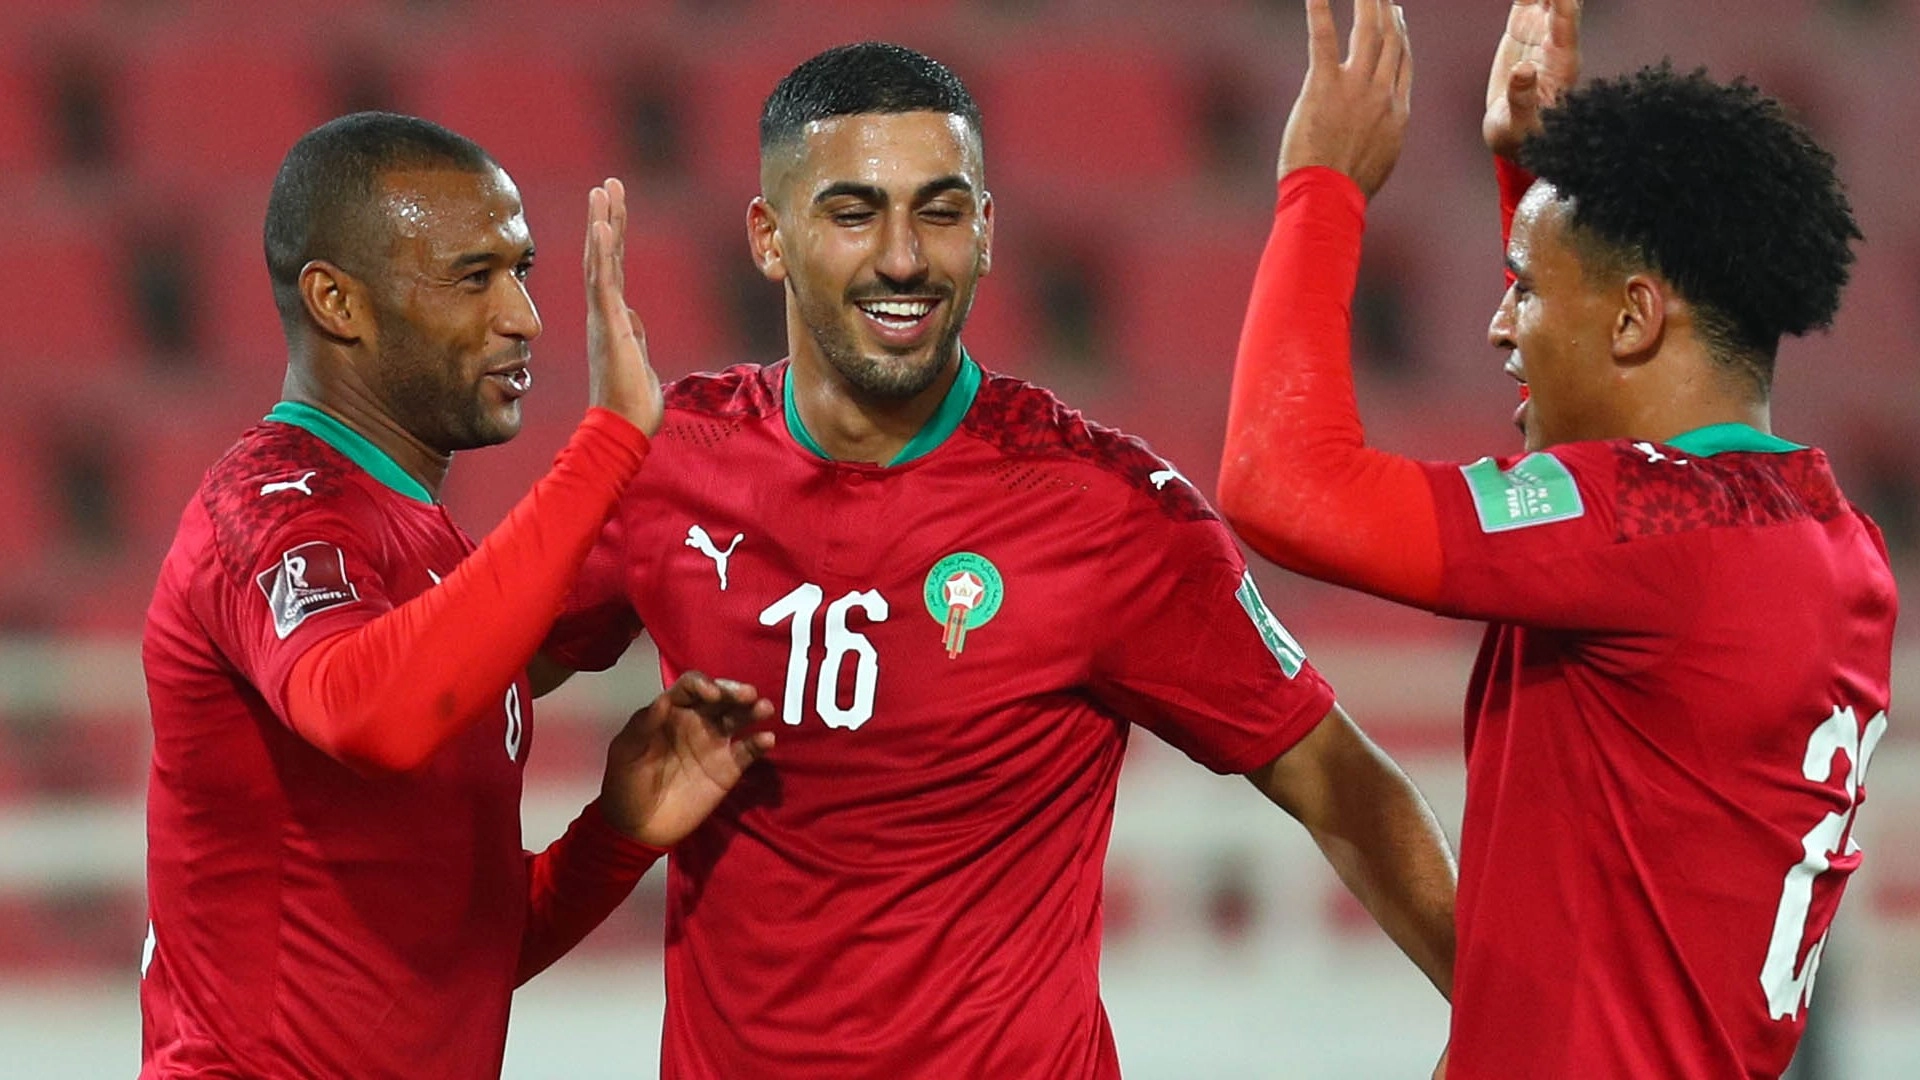 AFCON2023: Atlas Lions of Morocco complete comeback win over South Africa